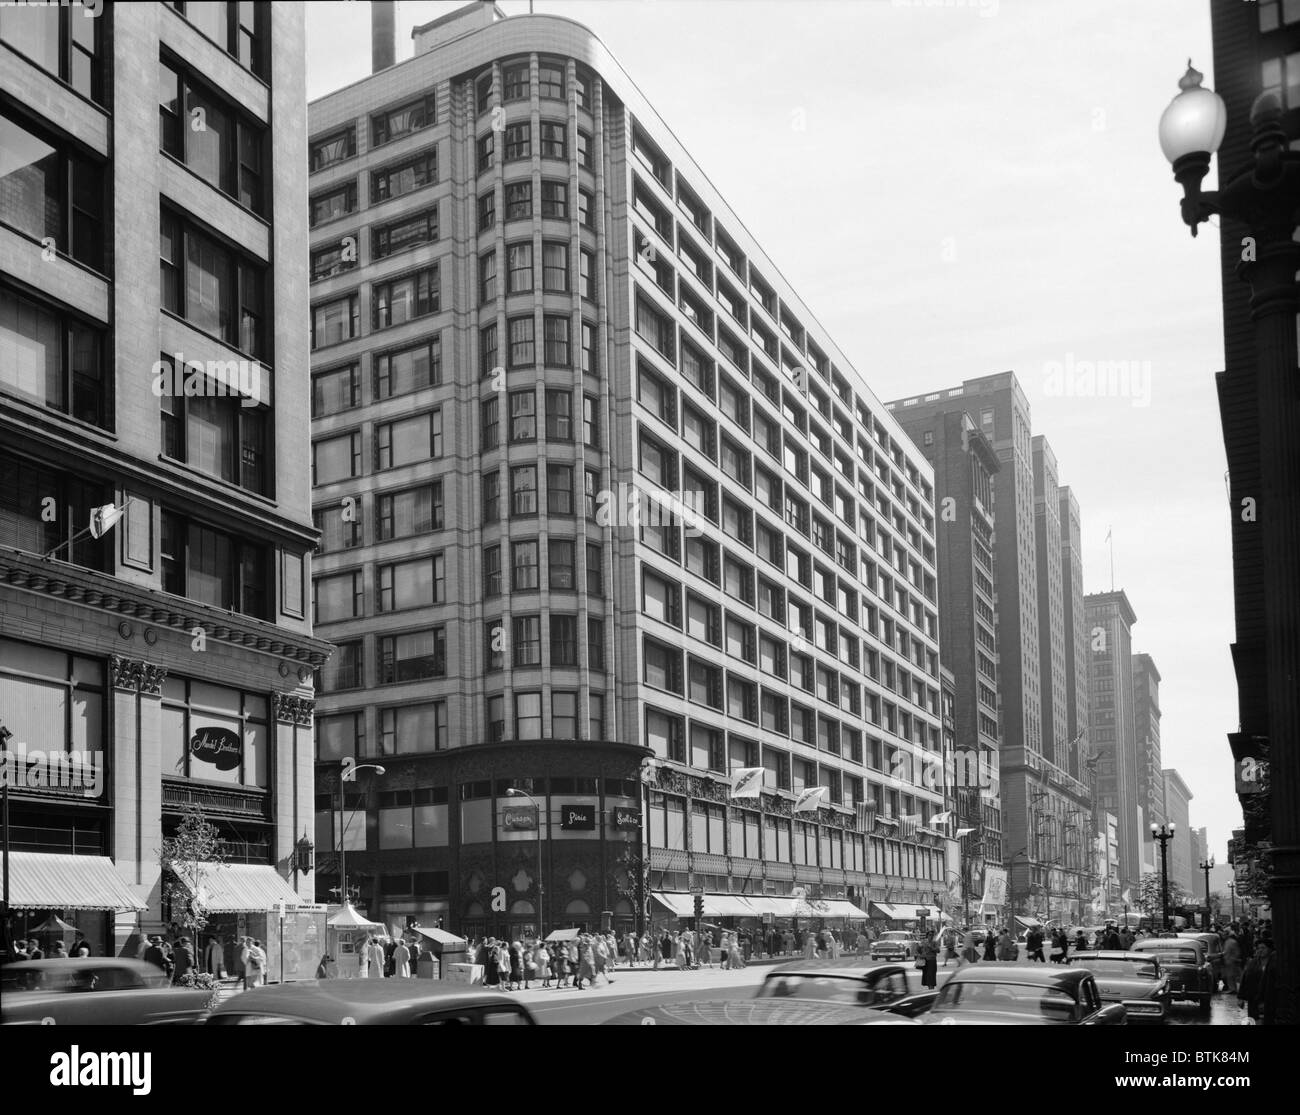 Carson, Pirie, Scott & Company Department Store of 1904 was Louis Sullivan's last large commercial buildings. The design features strong horizontal bands, large rectangular windows, and art nouveau influenced cast iron ornament. Stock Photo